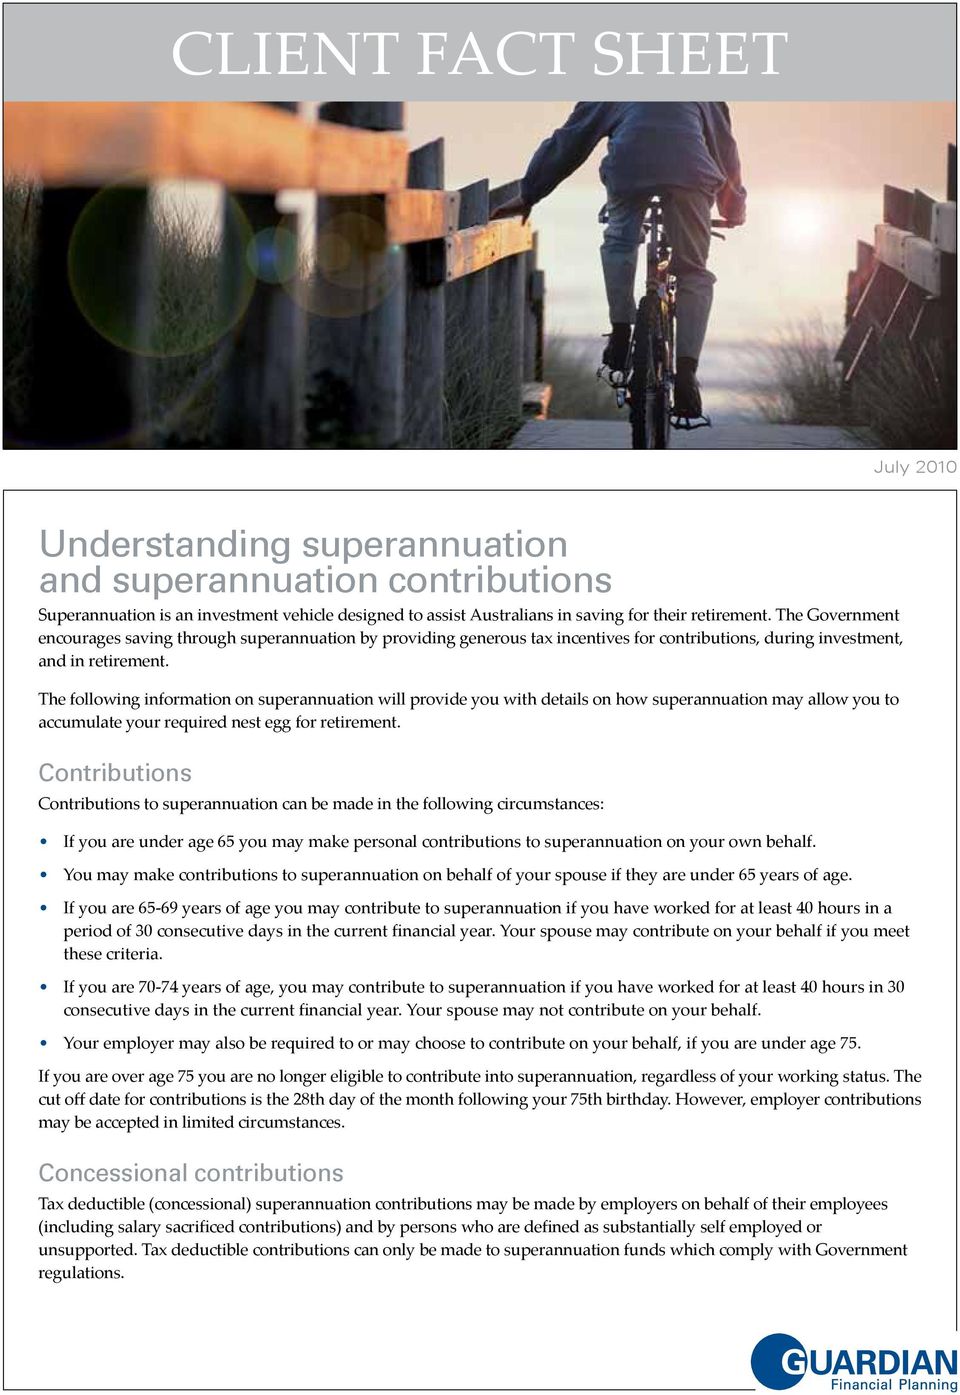 The following information on superannuation will provide you with details on how superannuation may allow you to accumulate your required nest egg for retirement.